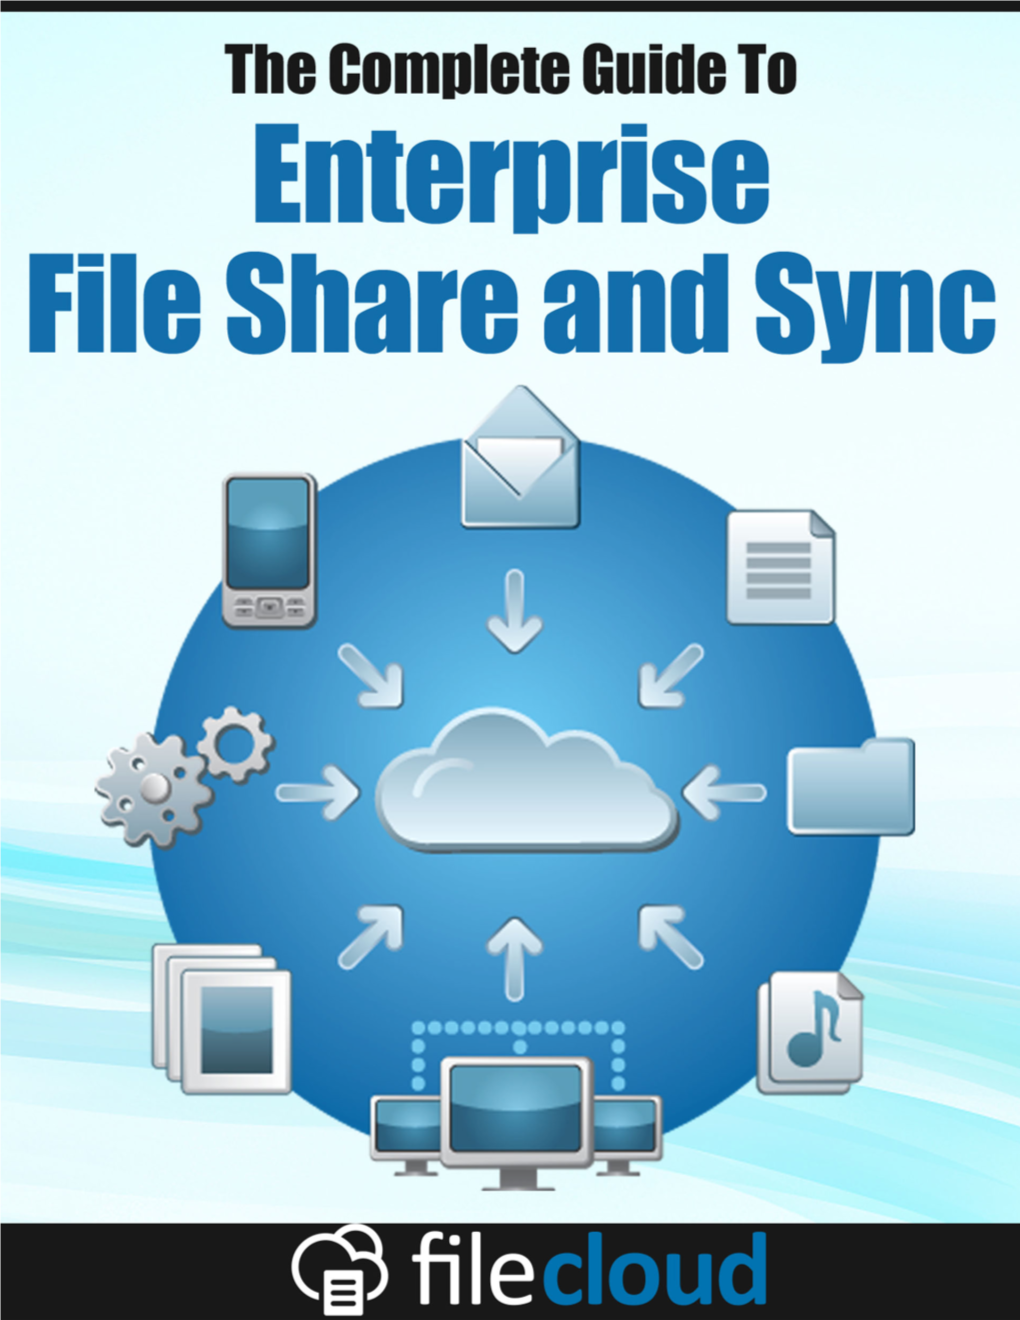 THE COMPLETE GUIDE to ENTERPRISE FILE SHARE and SYNC Copyright © 2015 All Rights Reserved